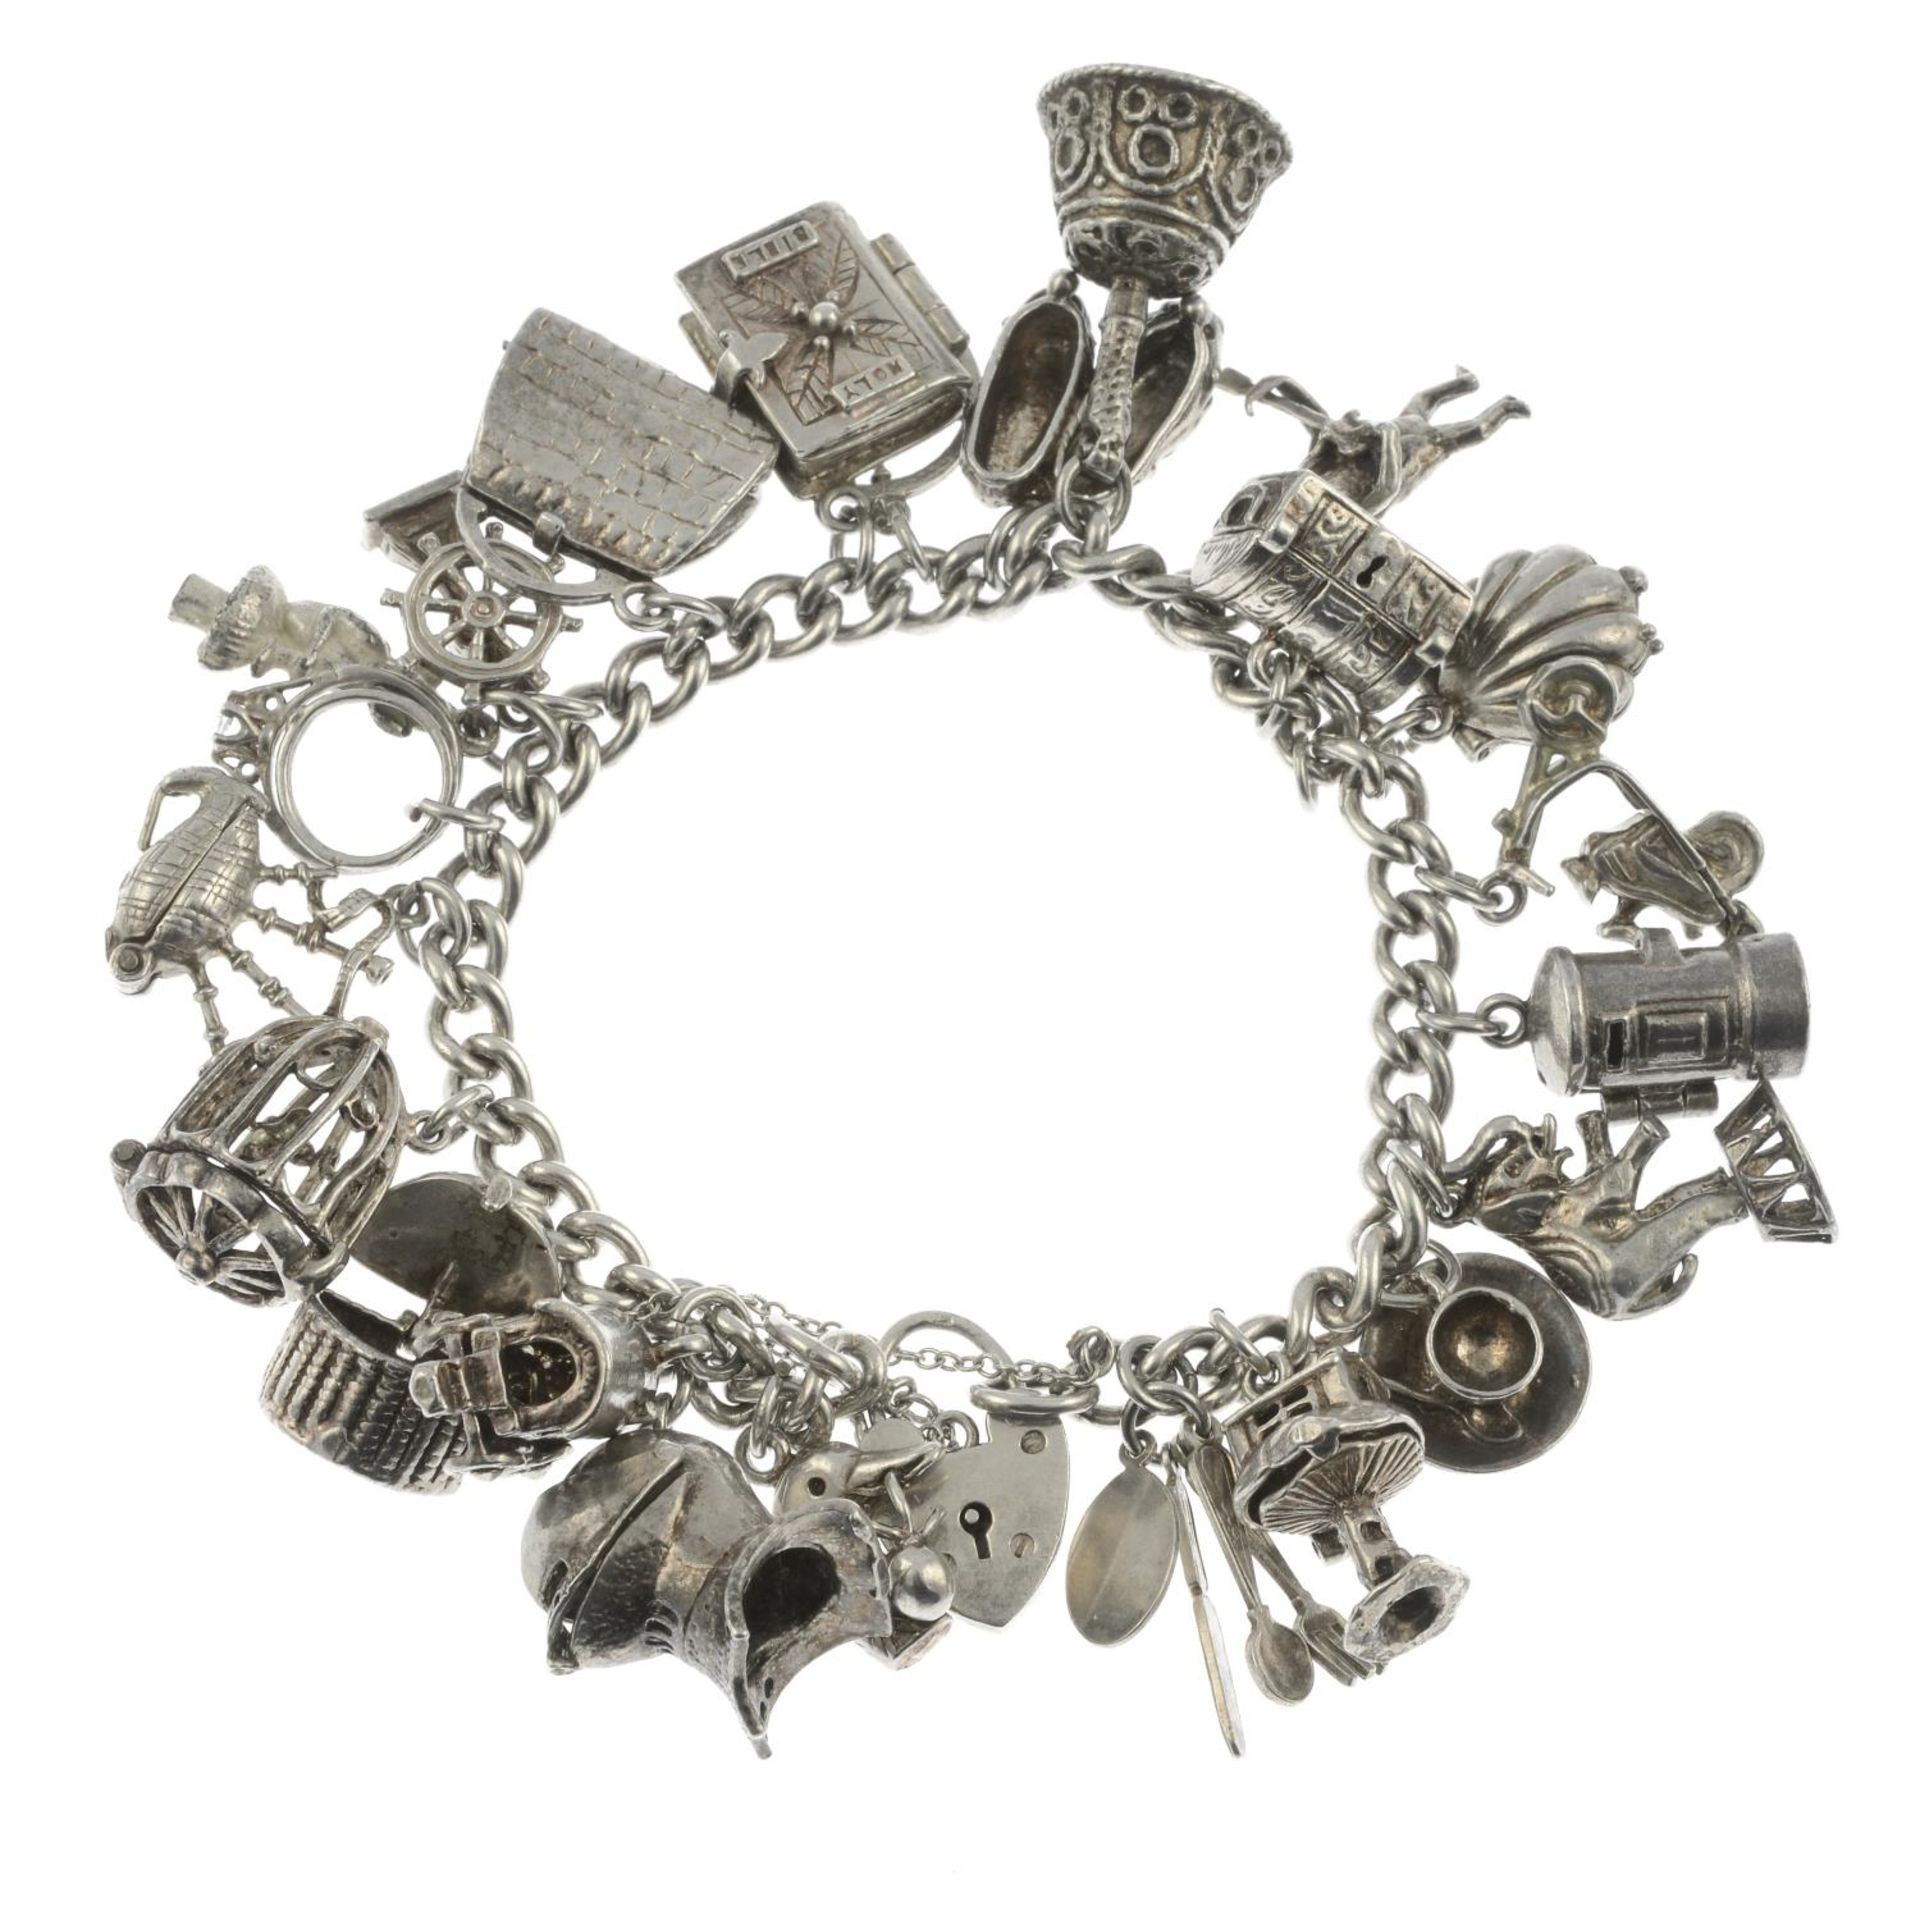 A silver charm bracelet, a further charm bracelet and assorted charms.Hallmarks for Birmingham.